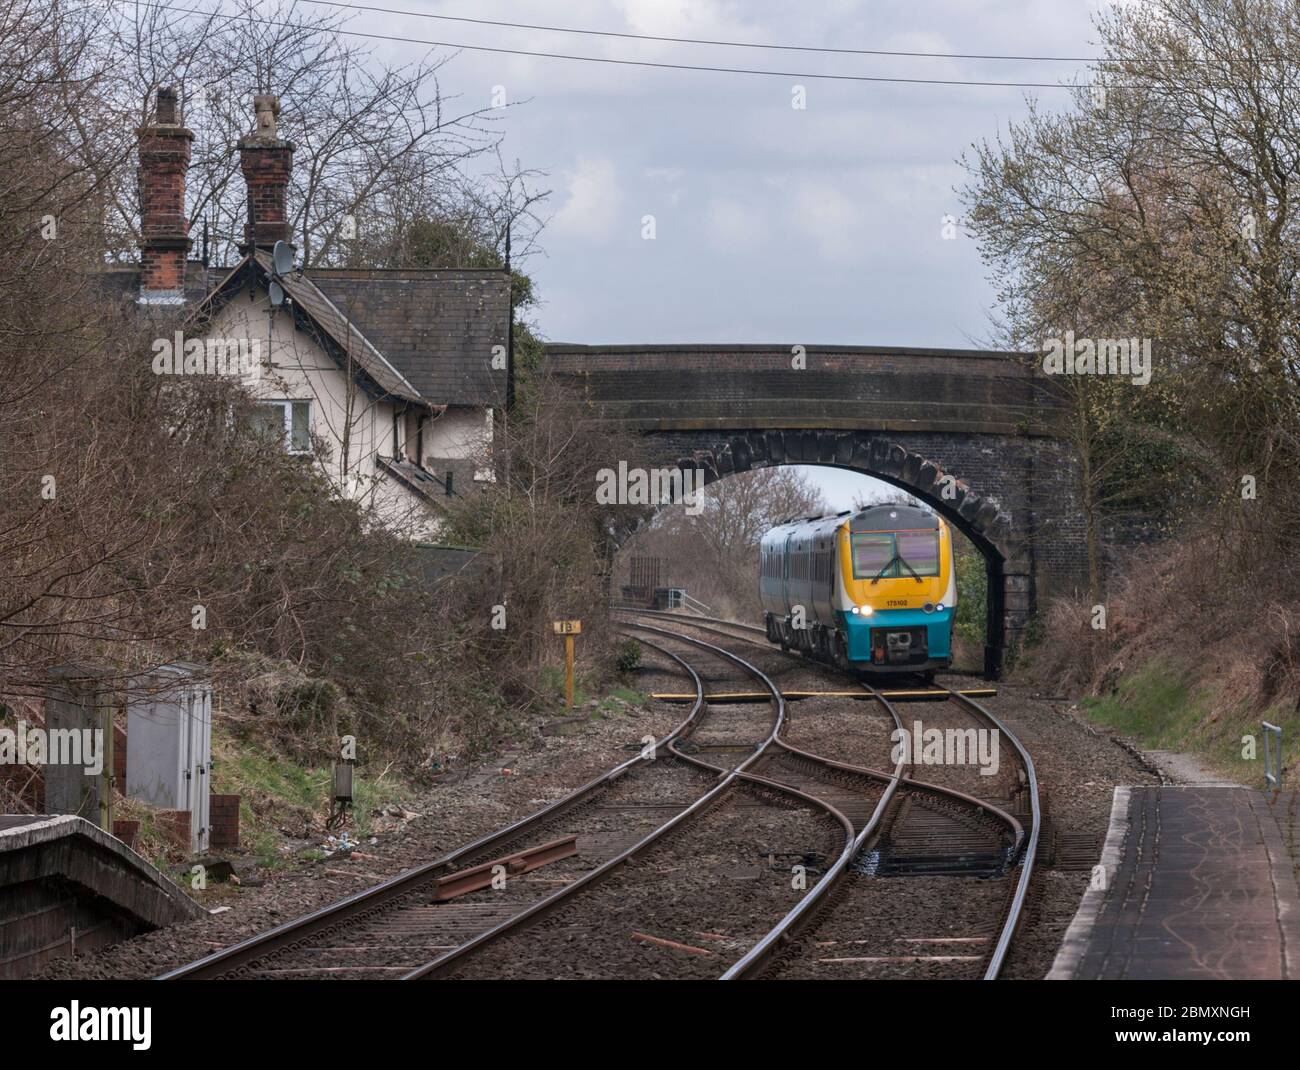 Arriva train Wales Alstom Coradia class 175 diesel train arriving at Runcorn East on the north Cheshire railway line Stock Photo